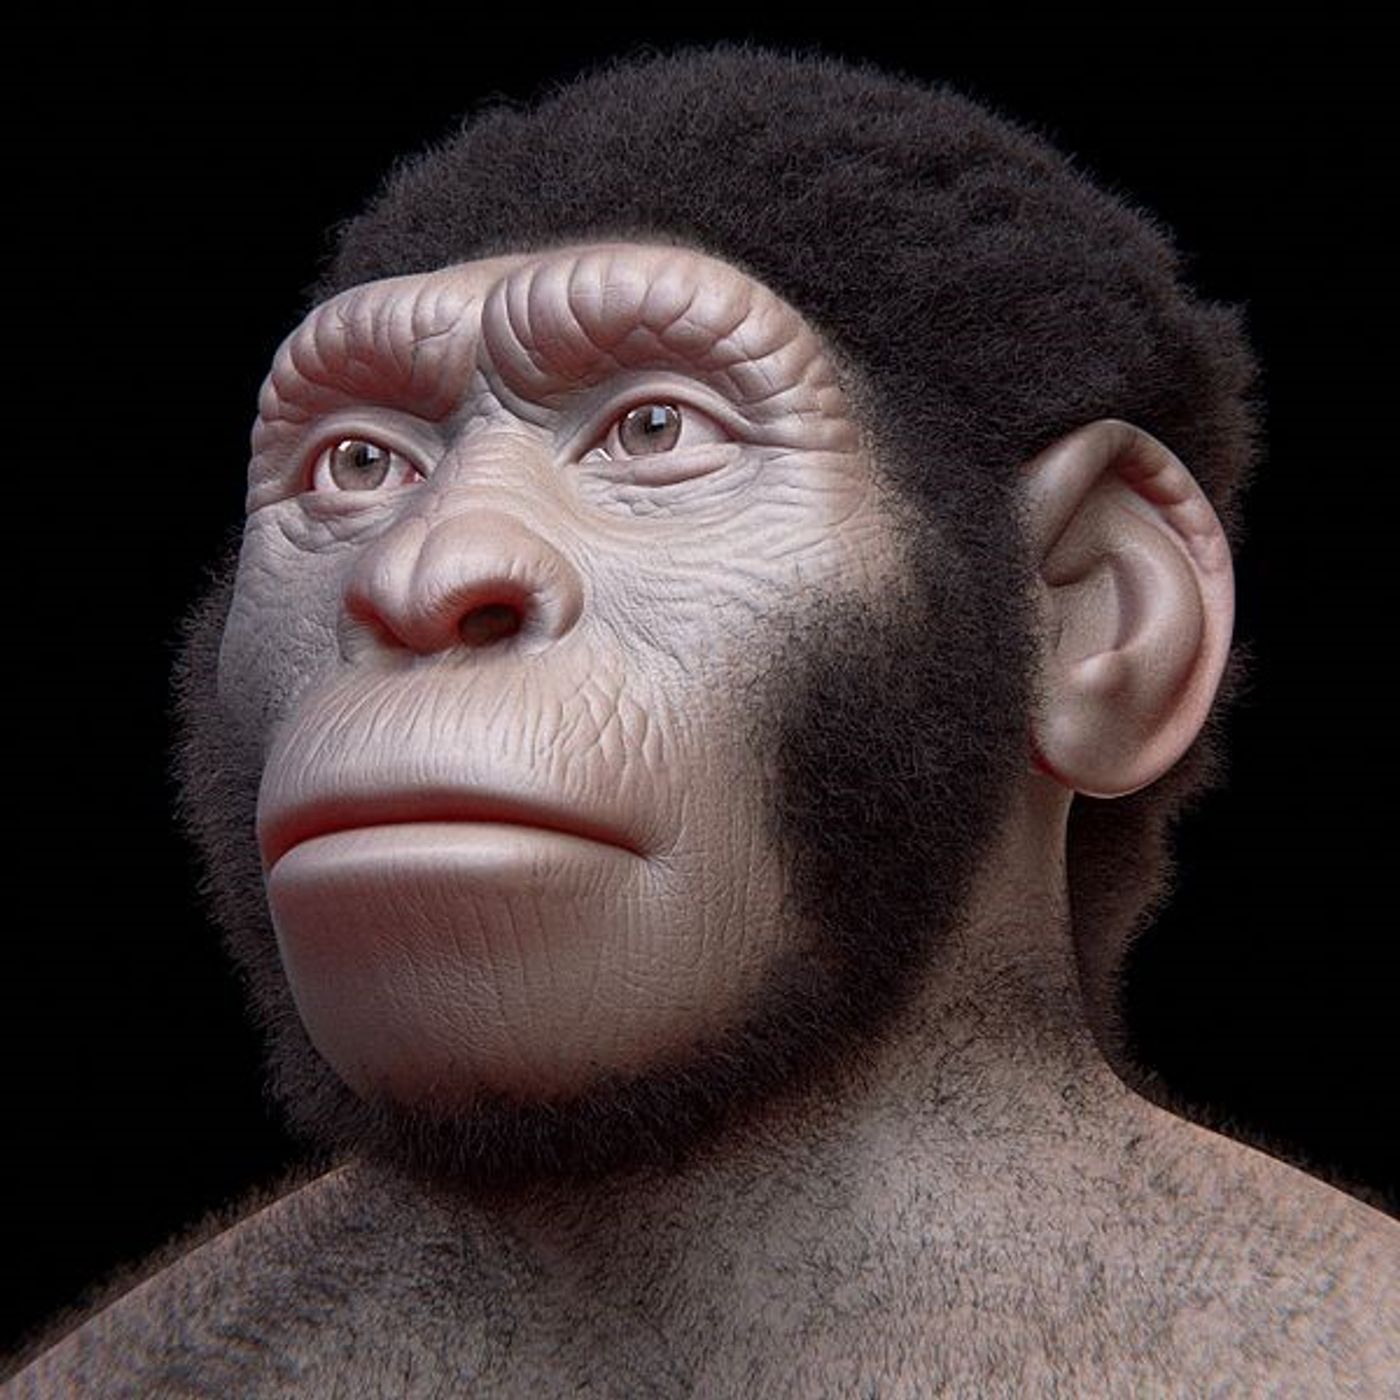 Monkey teeth are shedding new light on how early humans used tools